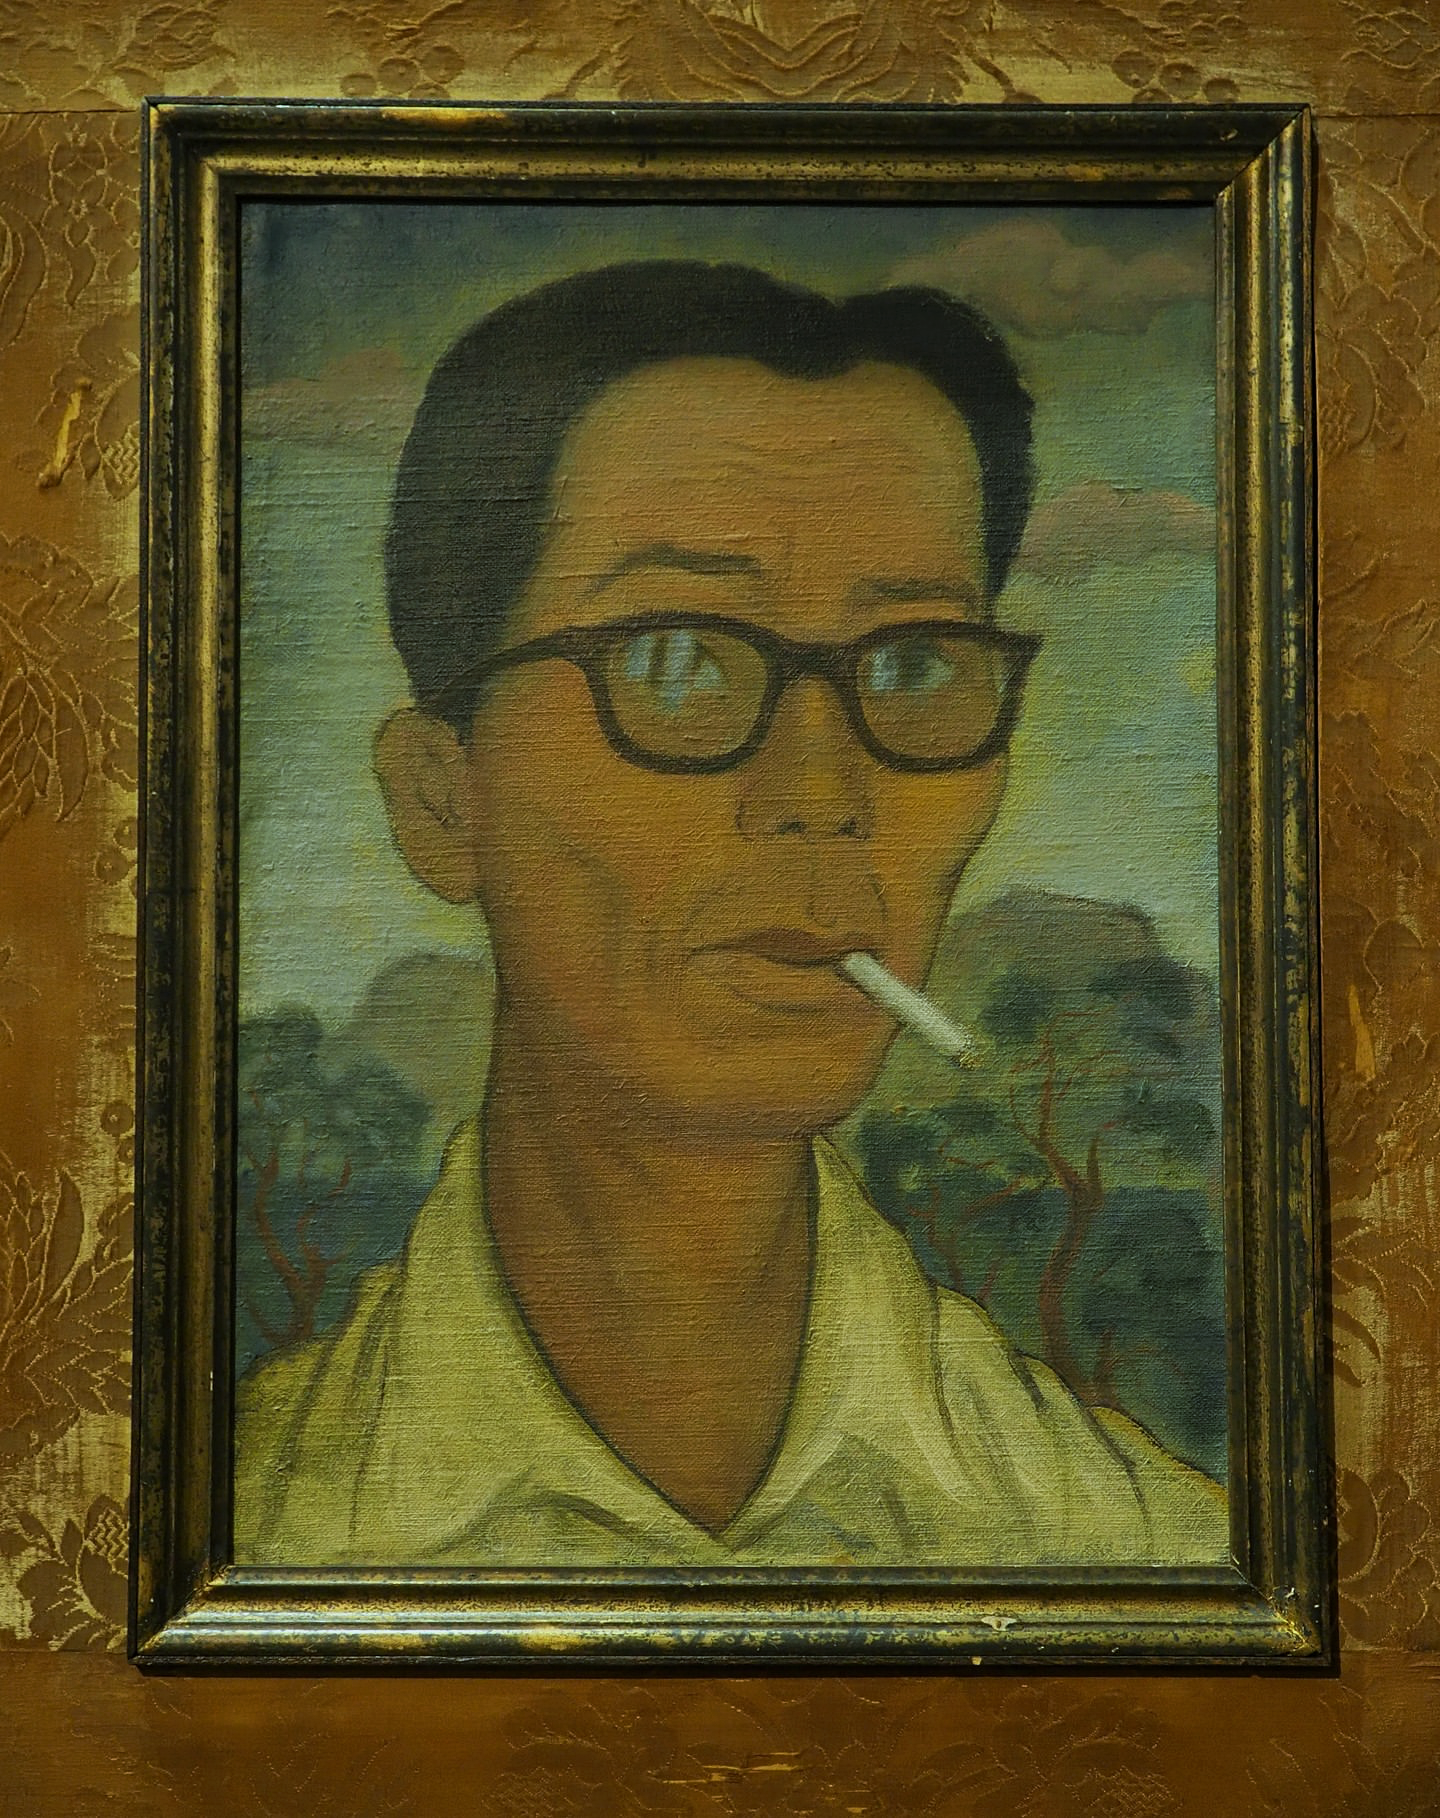 Mai Trung Thu (Vietnam, 1906-1980)
Self-portrait with glasses
Original frame of the artist
Oil on canvas
45 x 32 cm. (
Painted Around 1950